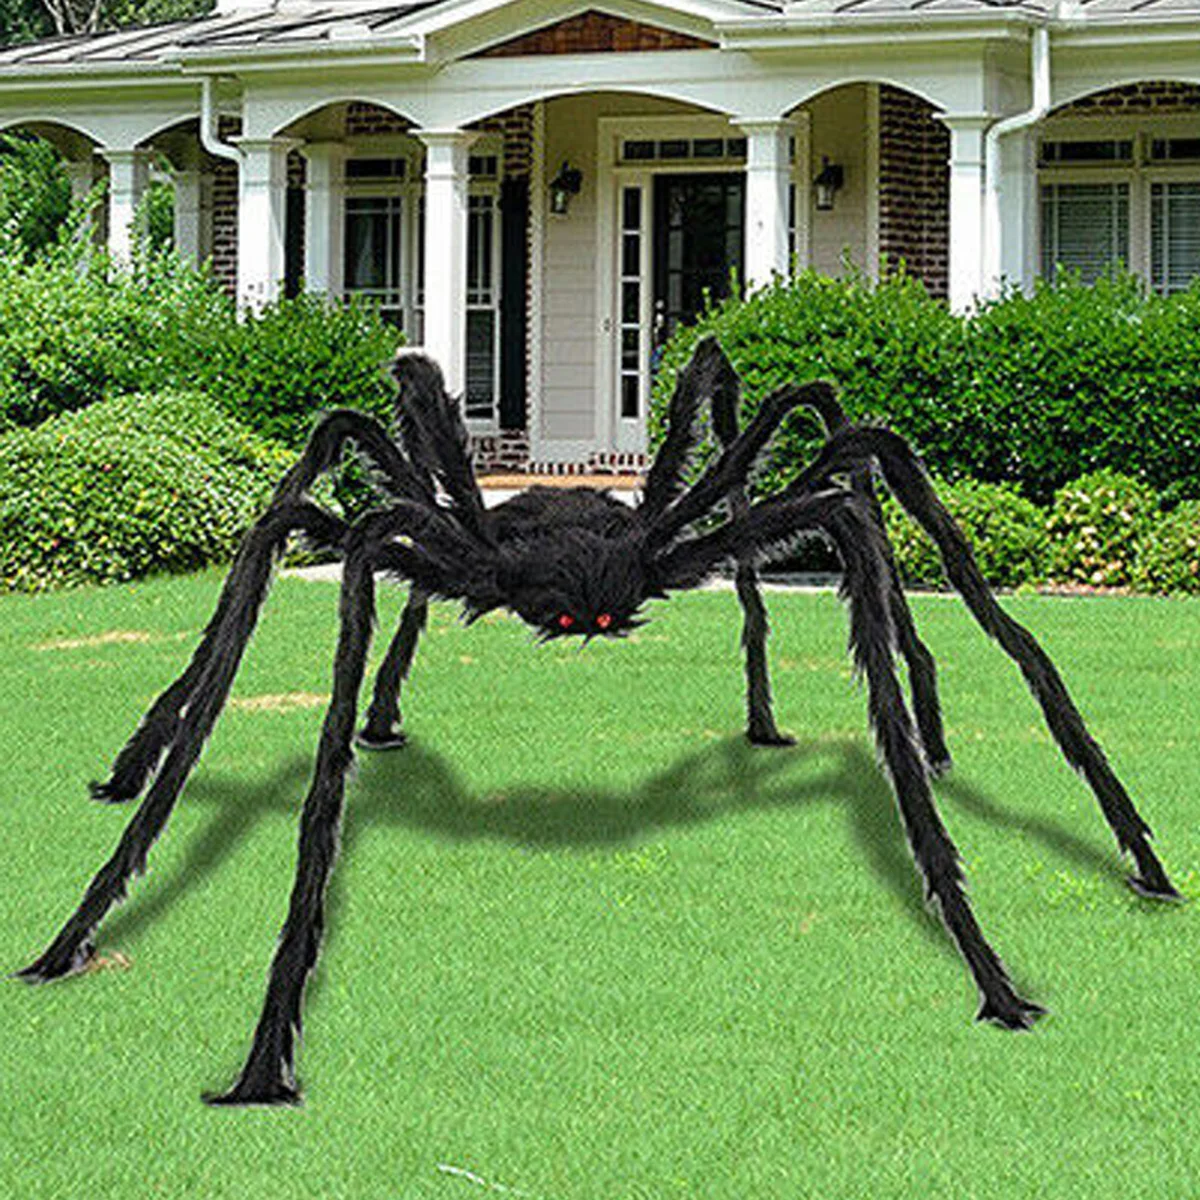 Details about   2 PCS Halloween Outdoor Decorations Hairy Spider 30 Inches Large Black Scary 